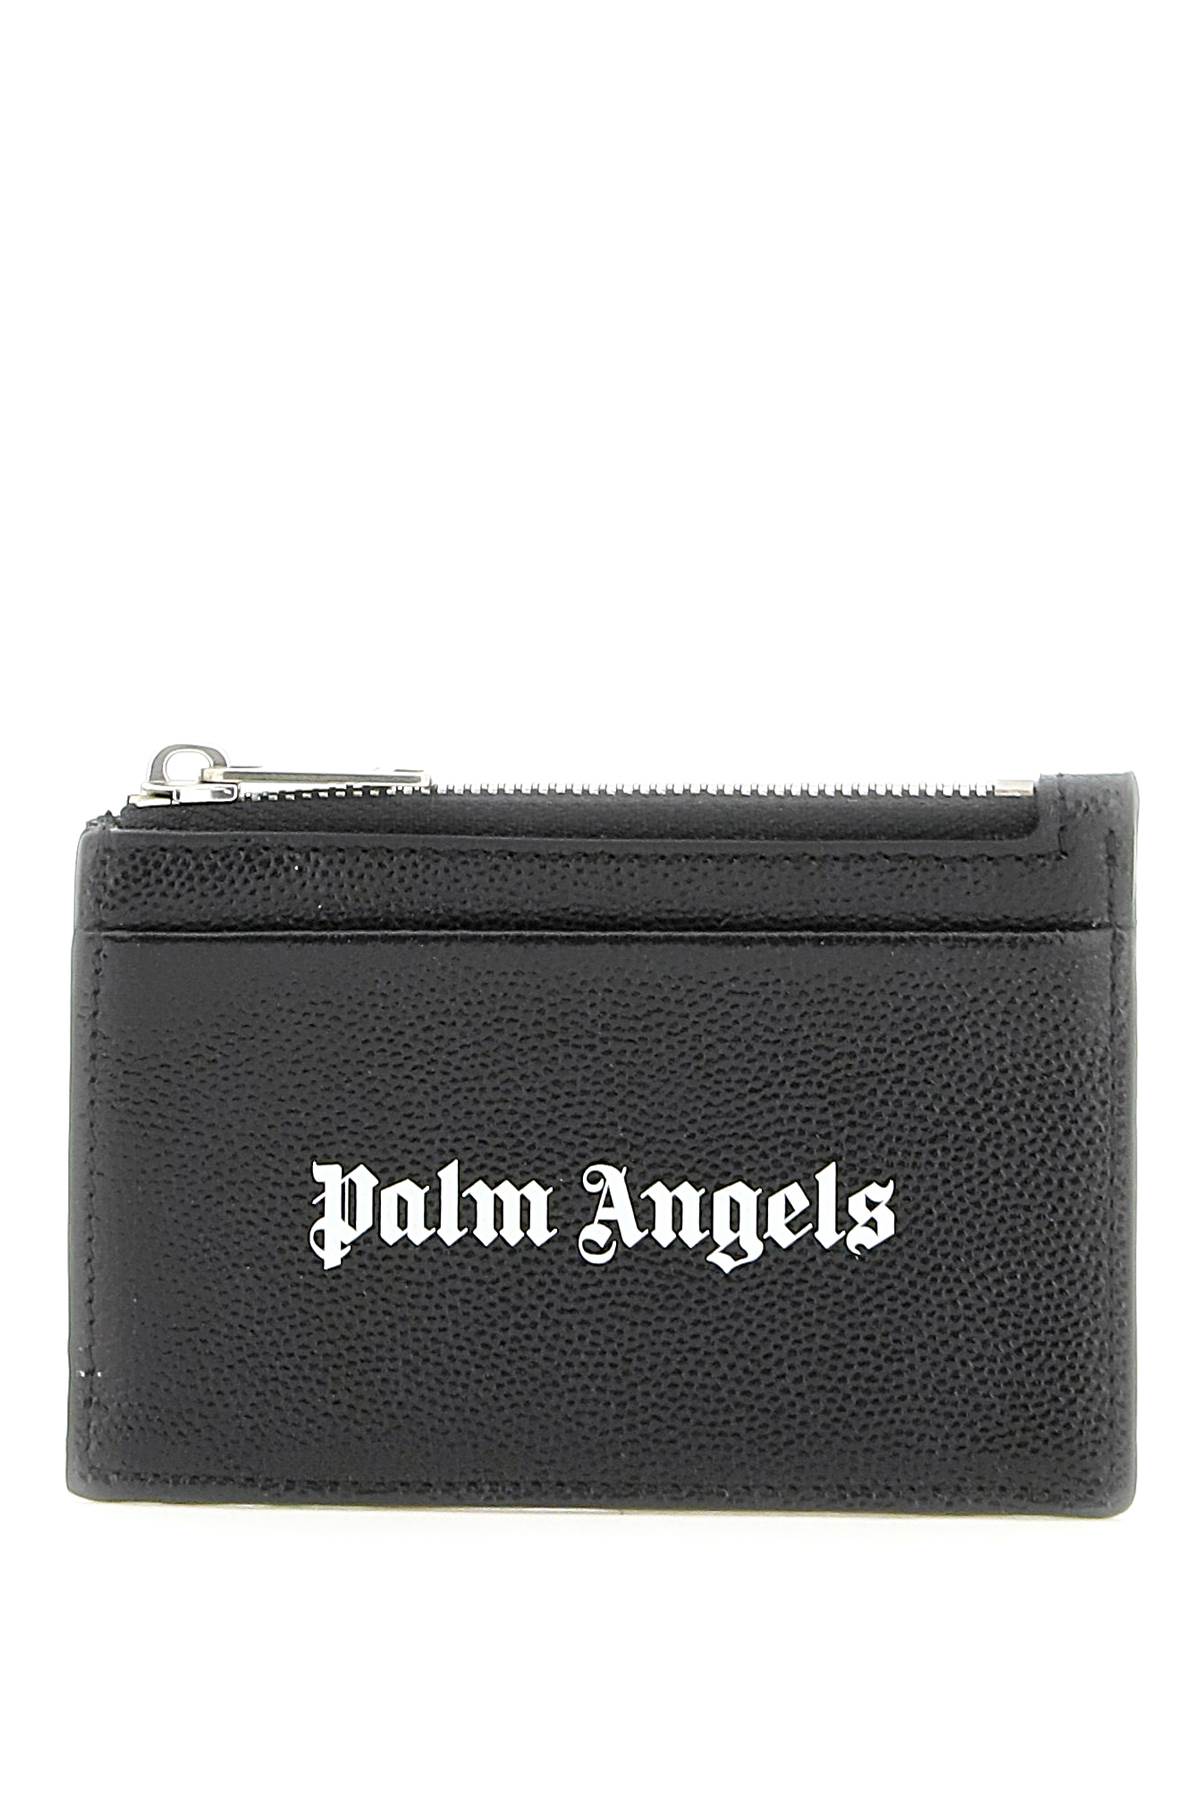 Palm Angels Leather Cardholder With Logo In Black White (black)